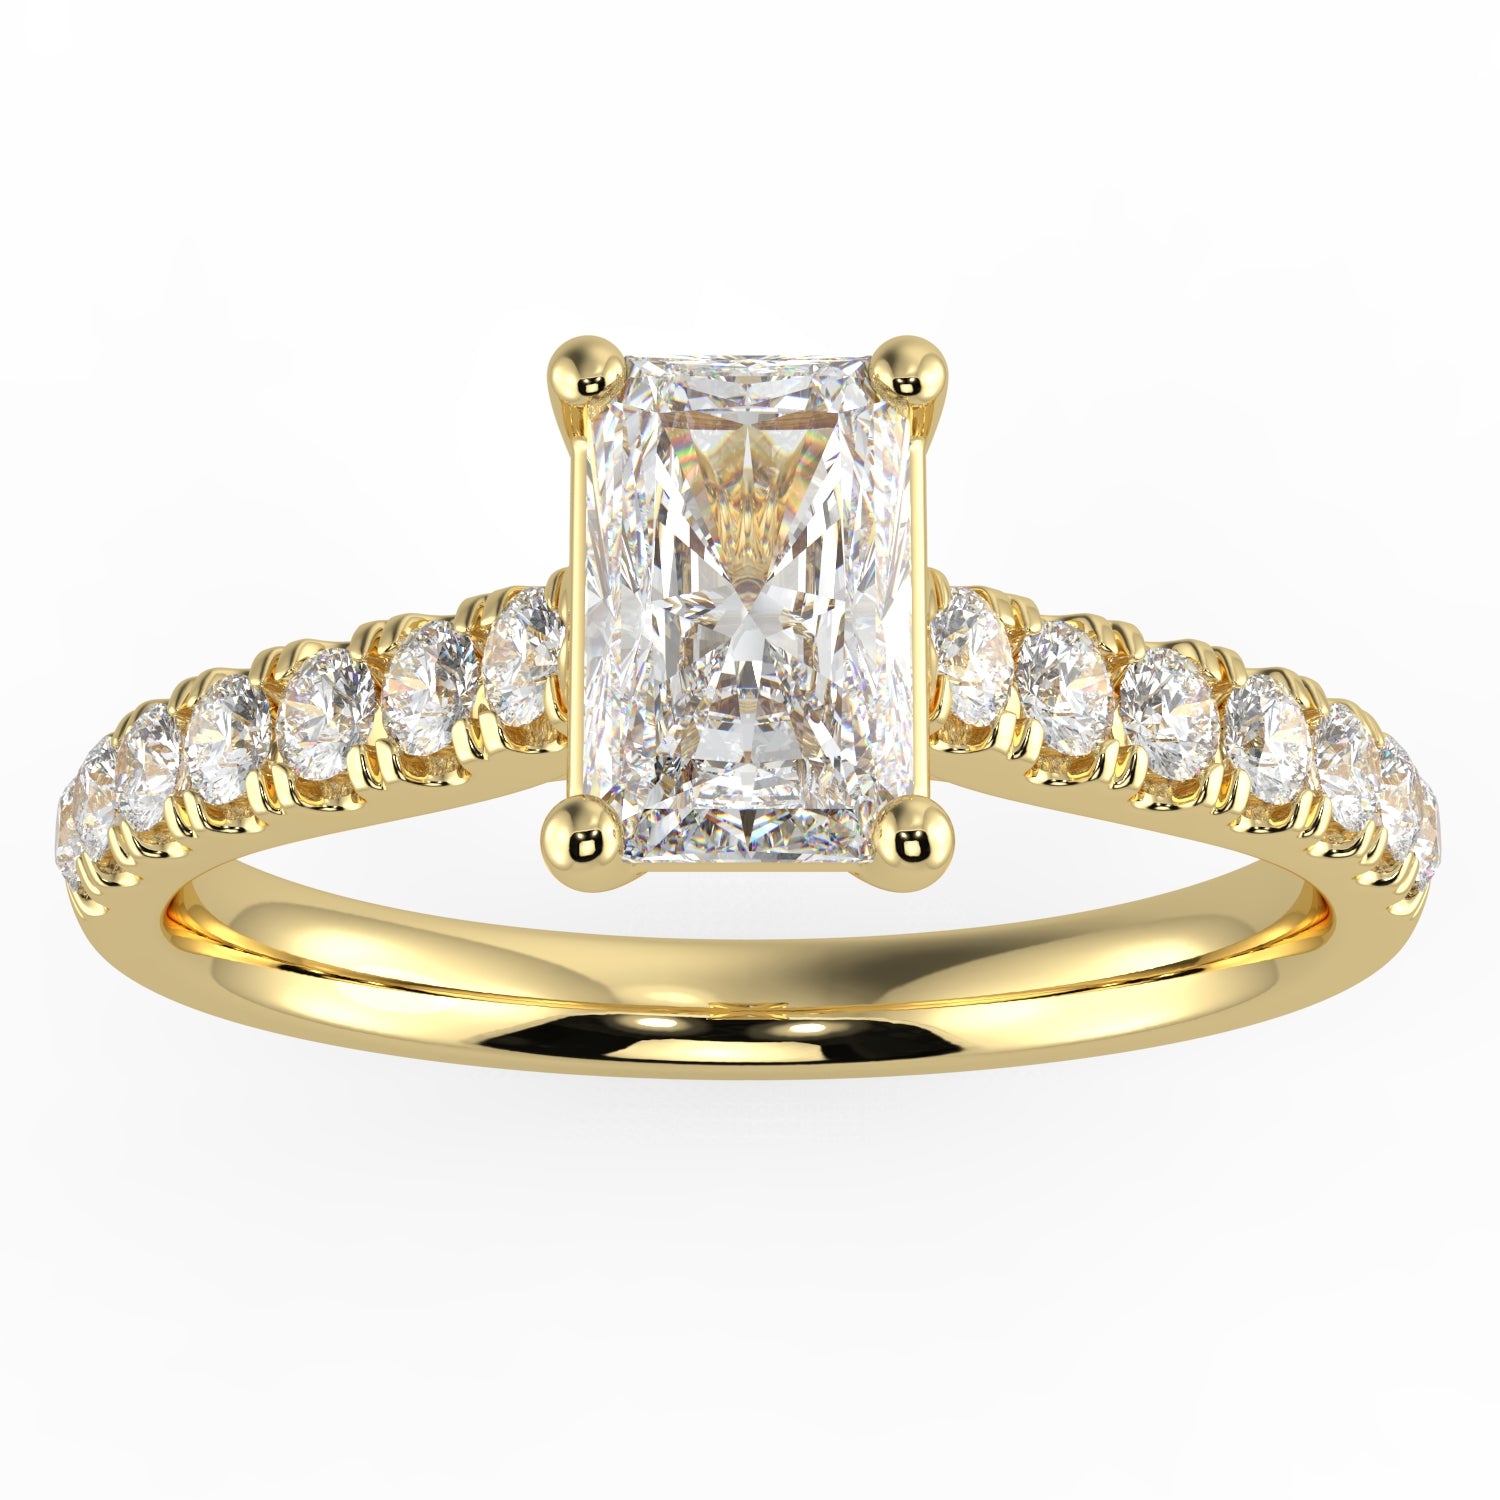 Natural Diamond Slim Shank Ring with 0.70ctw Radiant Shape Center & 0.30 Round Side GHI1 Stones Set on 14K Gold